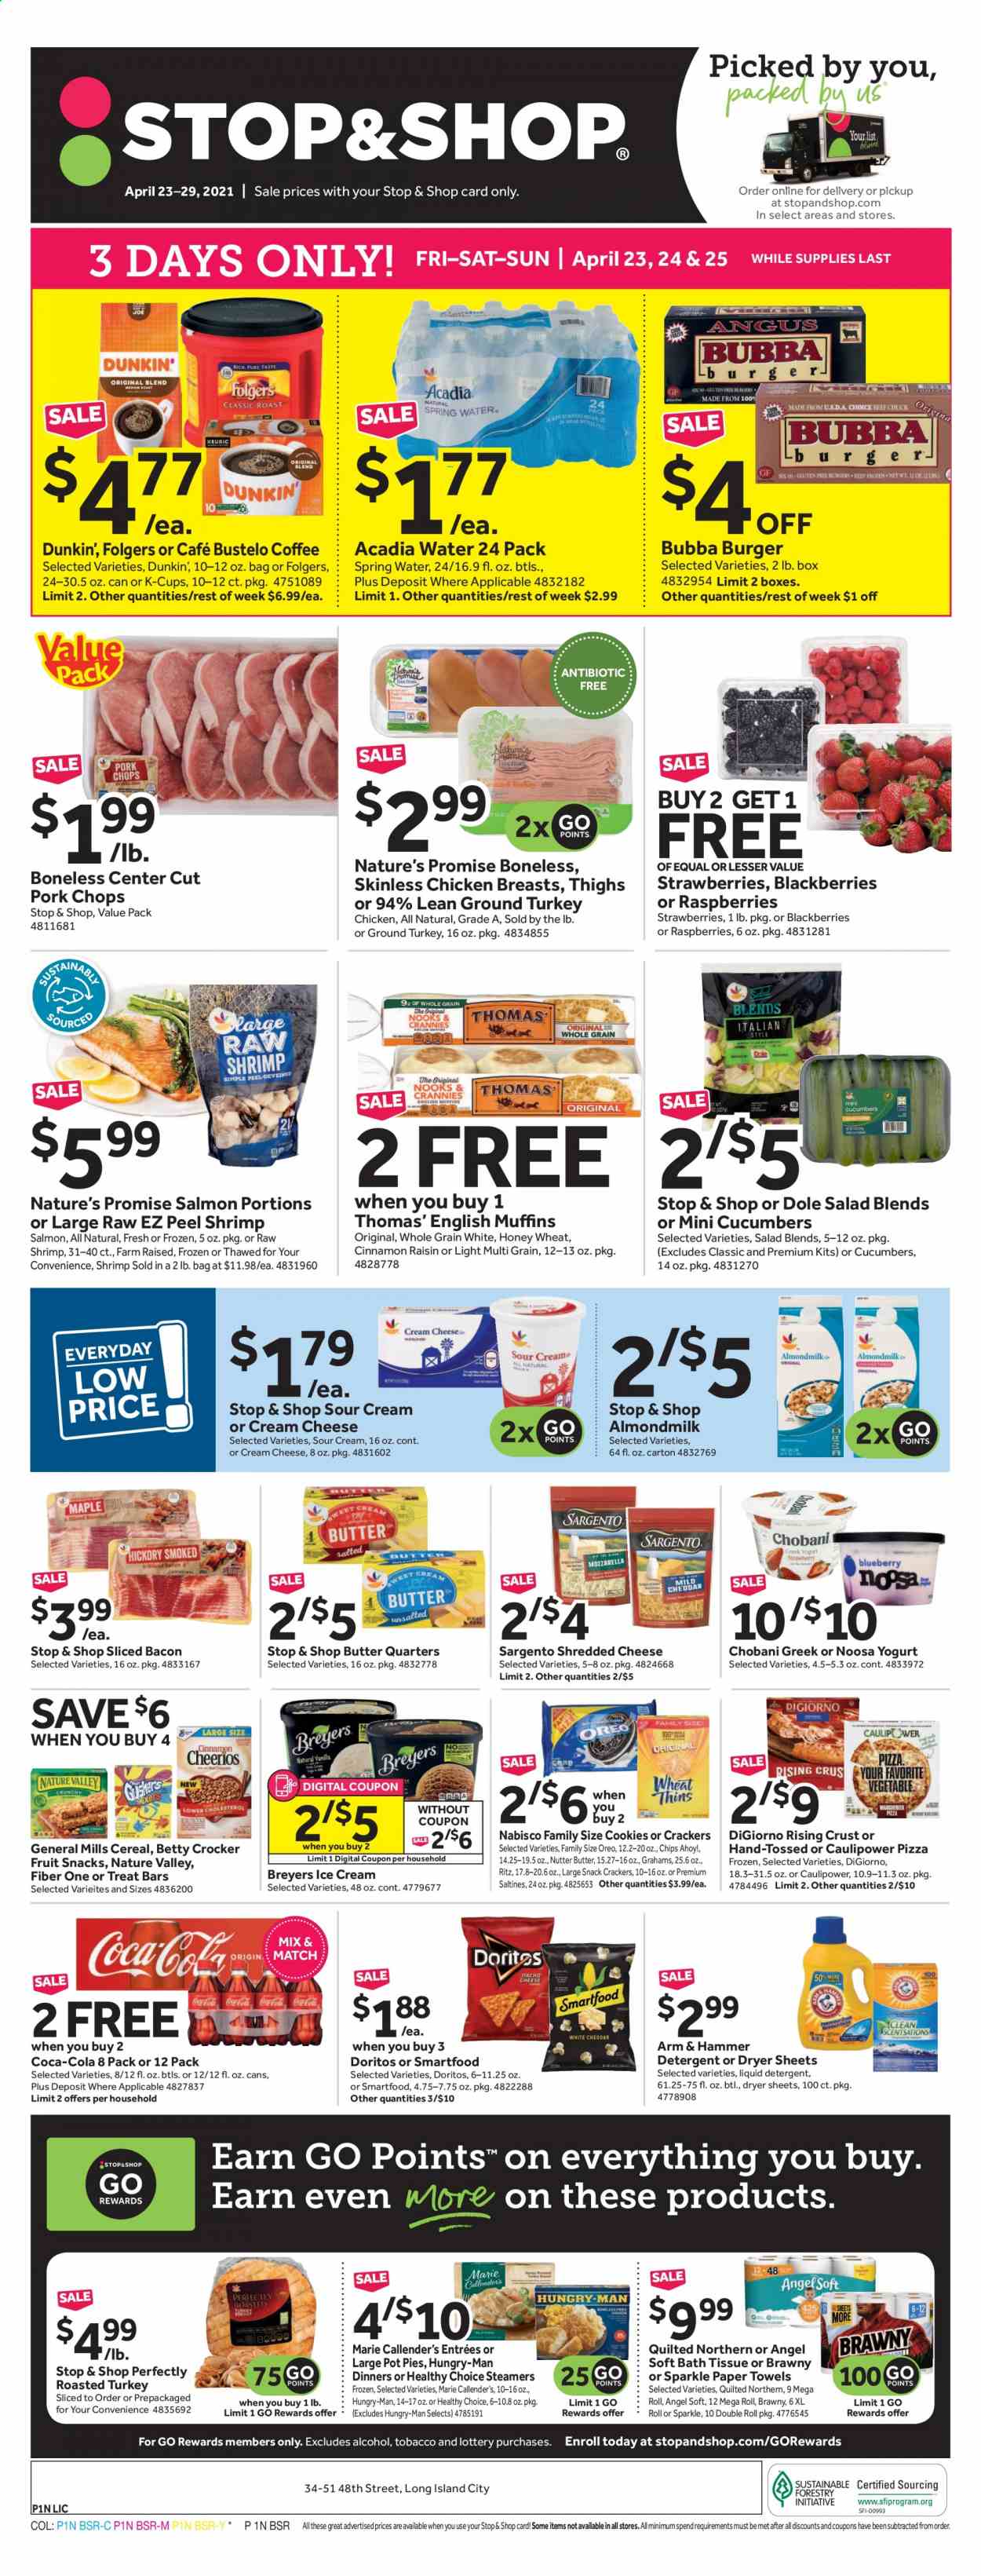 thumbnail - Stop & Shop Flyer - 04/23/2021 - 04/29/2021 - Sales products - english muffins, Nature’s Promise, pot pie, salad, Dole, blackberries, raspberries, strawberries, ground turkey, chicken breasts, pork chops, pork meat, salmon, shrimps, pizza, Healthy Choice, Marie Callender's, bacon, cream cheese, shredded cheese, Sargento, Oreo, yoghurt, Chobani, almond milk, butter, sour cream, ice cream, cookies, crackers, fruit snack, RITZ, Doritos, Smartfood, Thins, saltines, ARM & HAMMER, cereals, Cheerios, Nature Valley, Fiber One, Coca-Cola, spring water, Acadia, coffee, Folgers, coffee capsules, K-Cups, bath tissue, Quilted Northern, kitchen towels, paper towels, liquid detergent, dryer sheets, pin. Page 1.